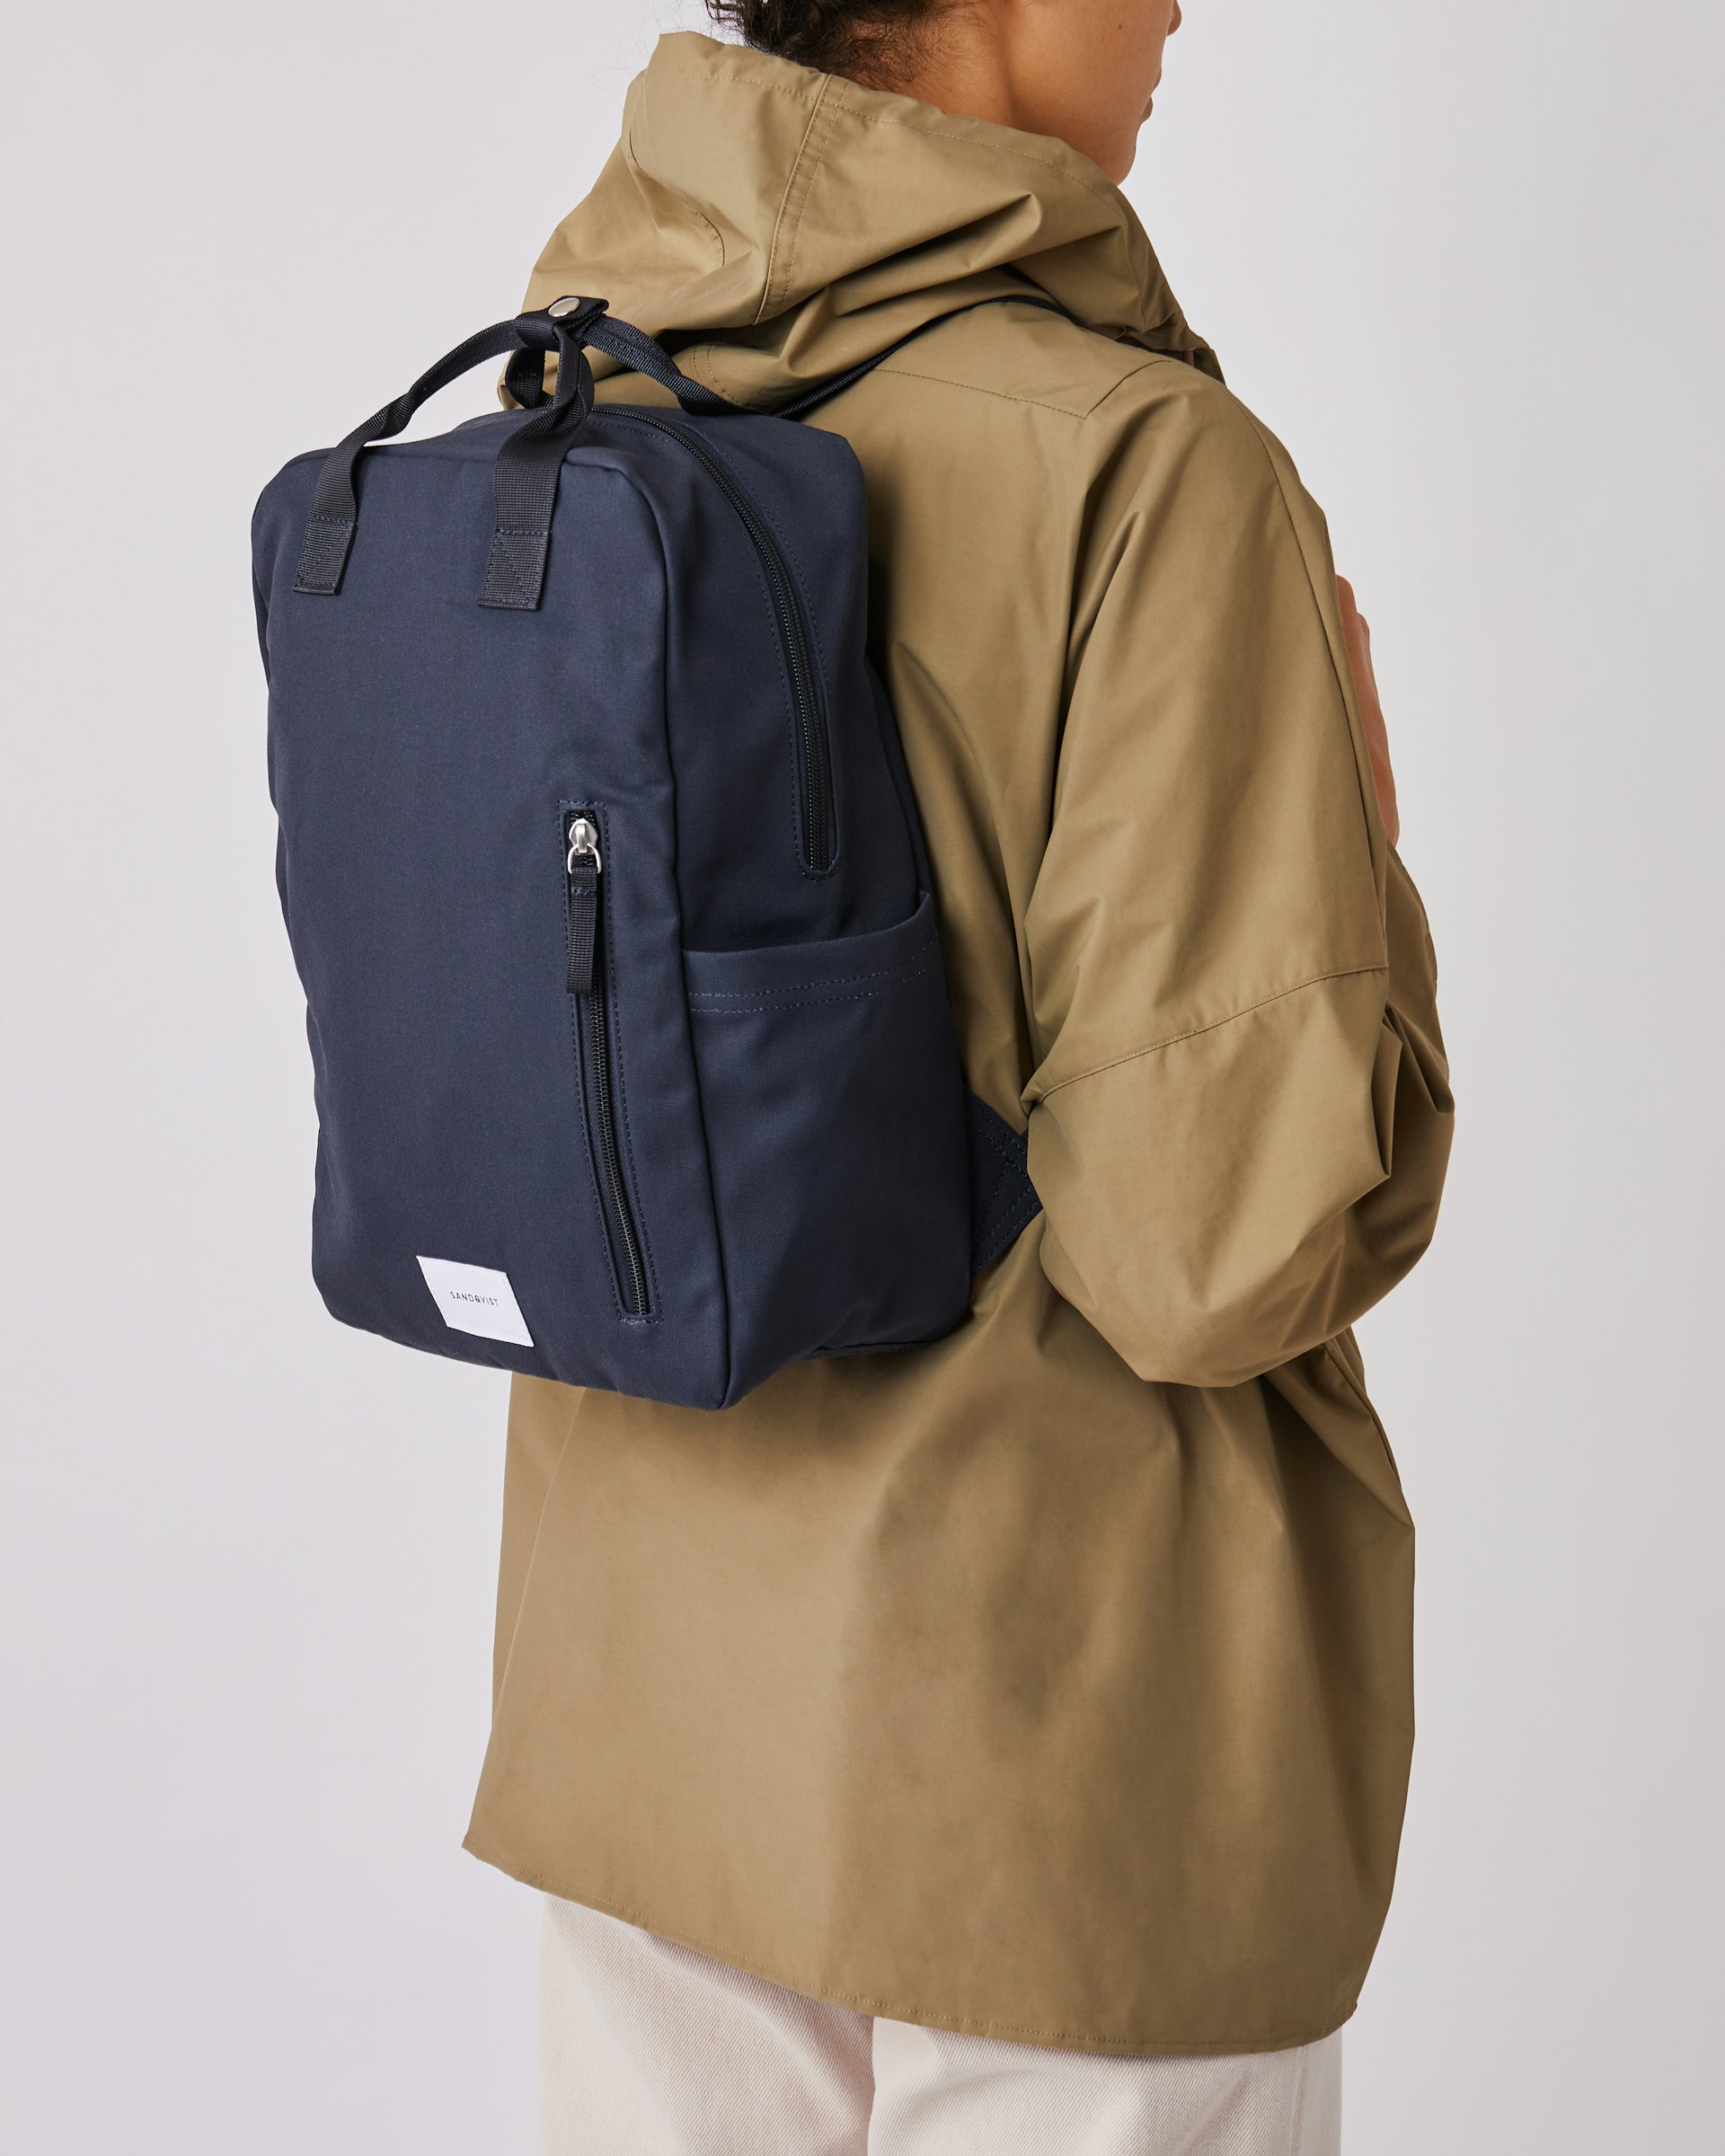 Knut belongs to the category Backpacks and is in color navy (7 of 7)